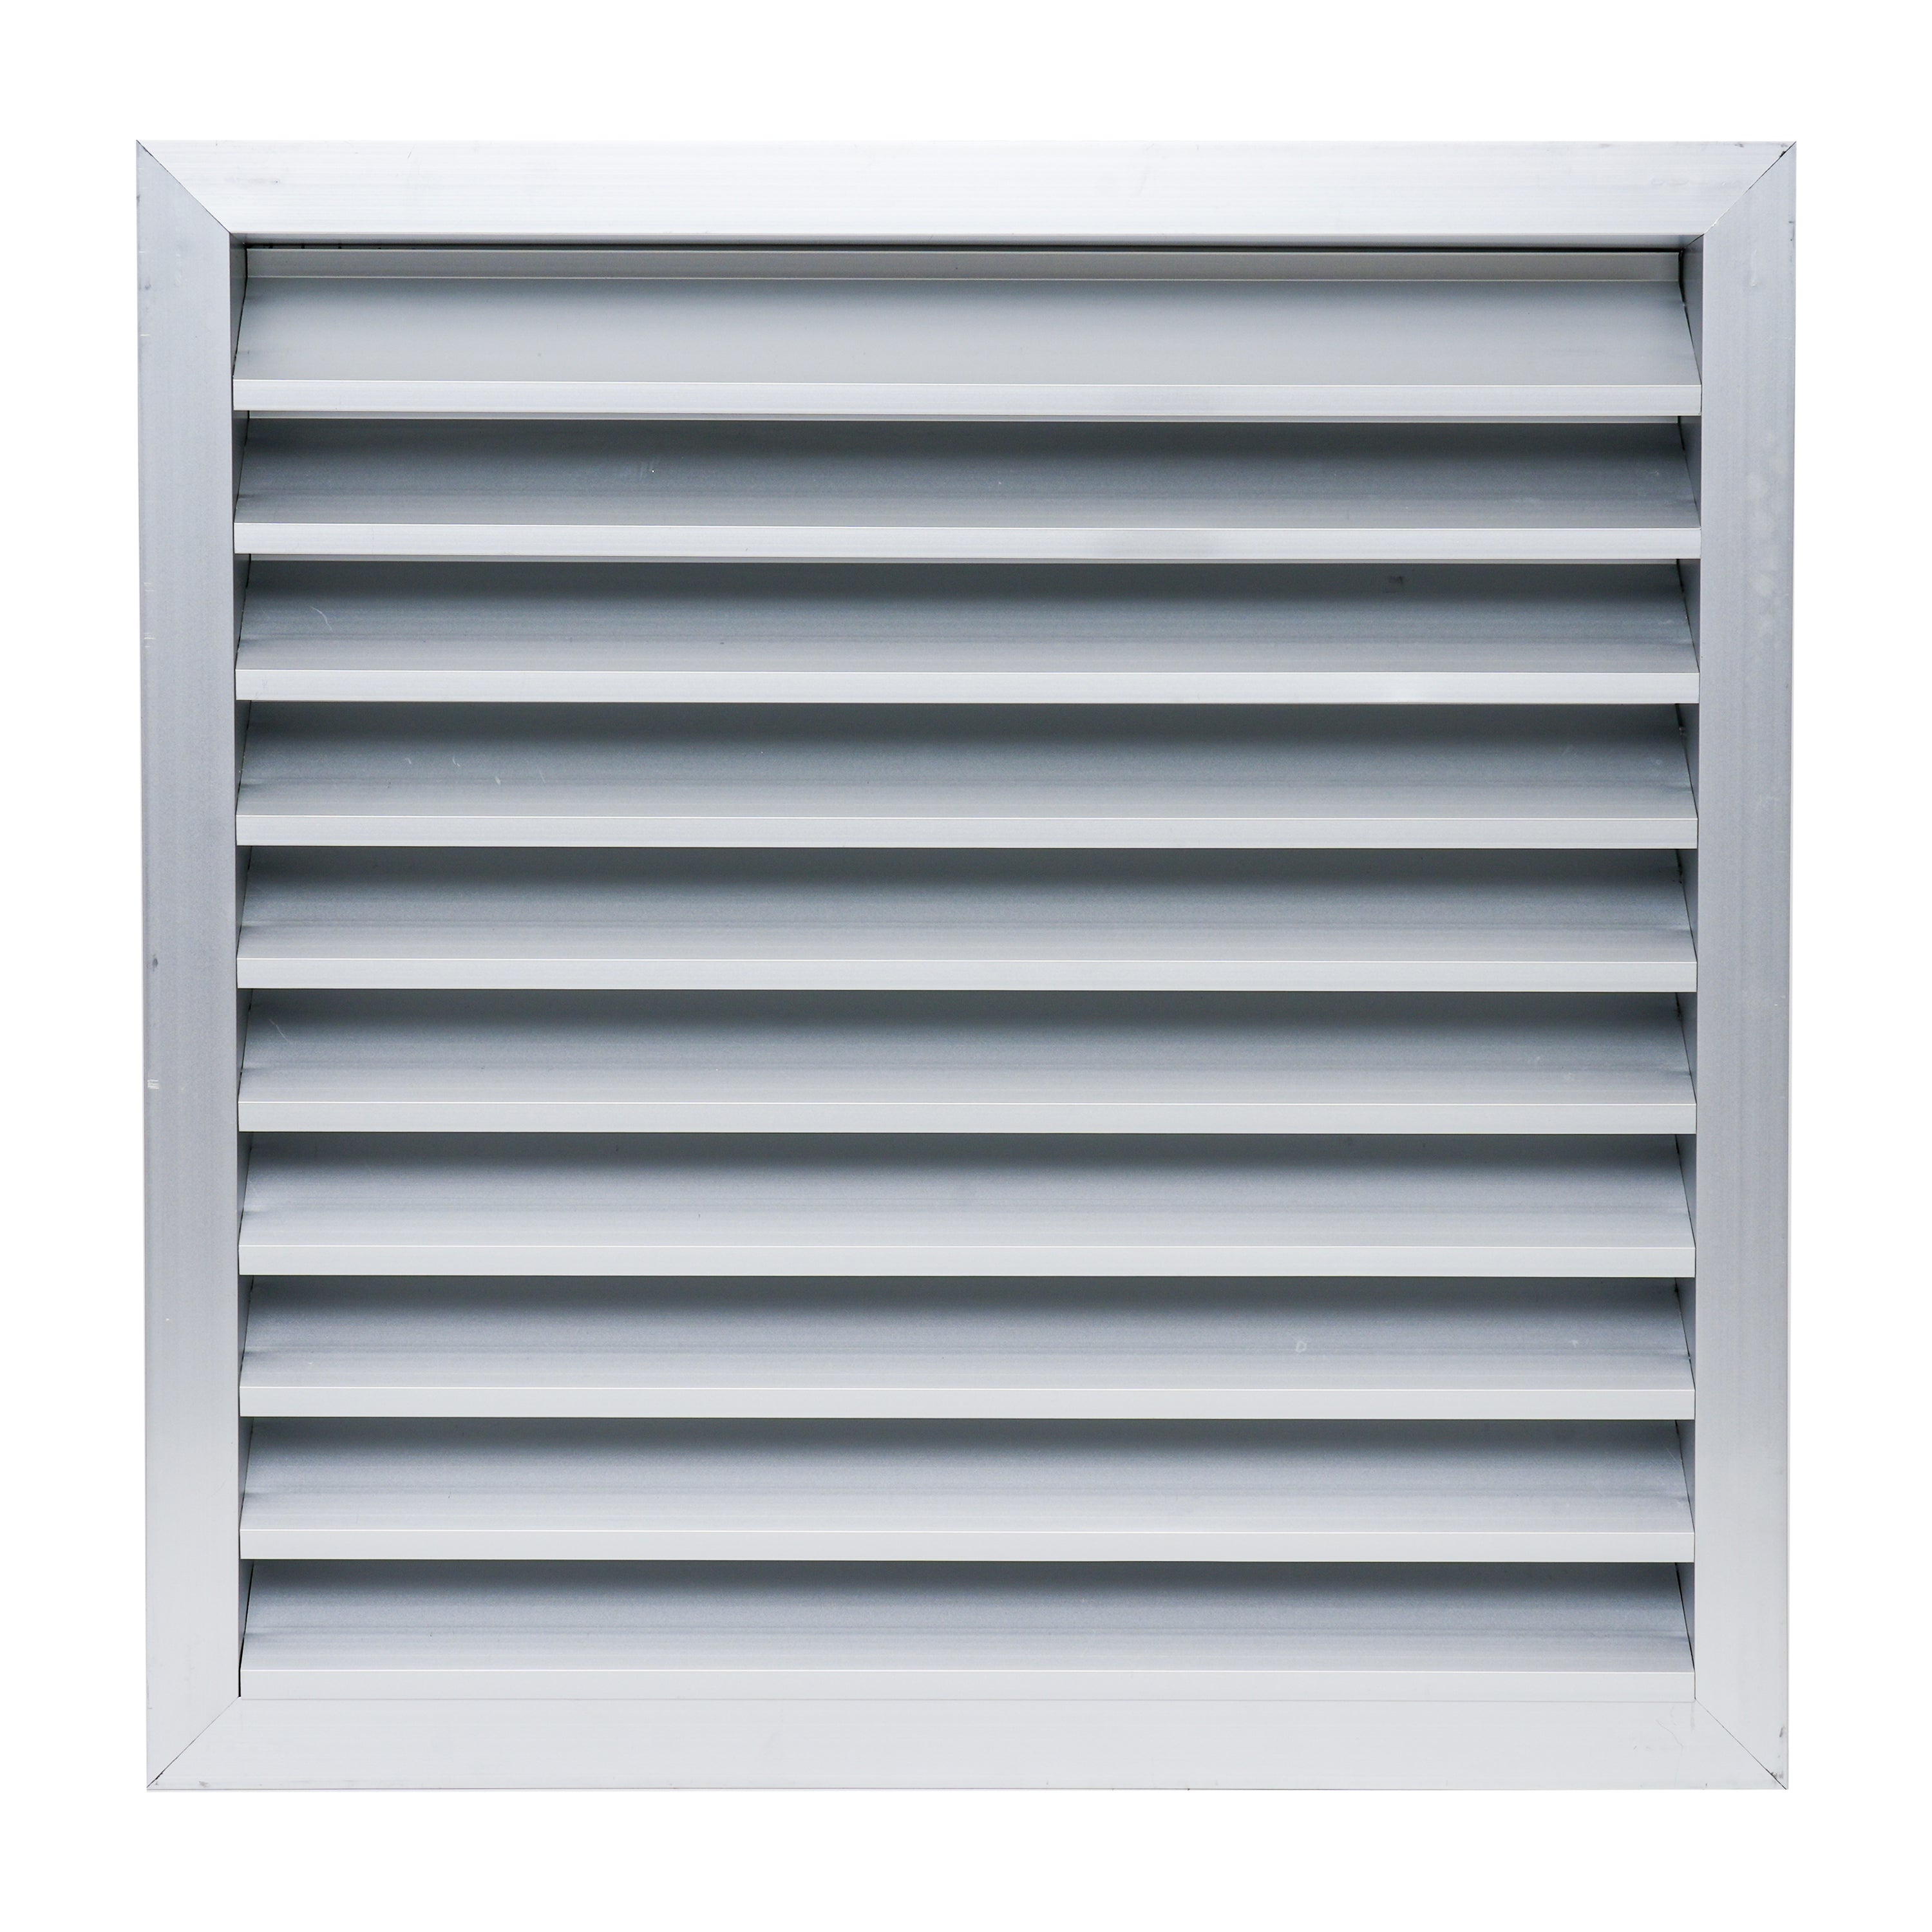 20"W x 20"H [Wall Opening] Anodized Aluminum Exterior Wall vent Gable shed for Crawlspace, Outdoor, Doors, Attic | Weatherproof, Rain&Rust Proof, Overall: 22"W X 22"H